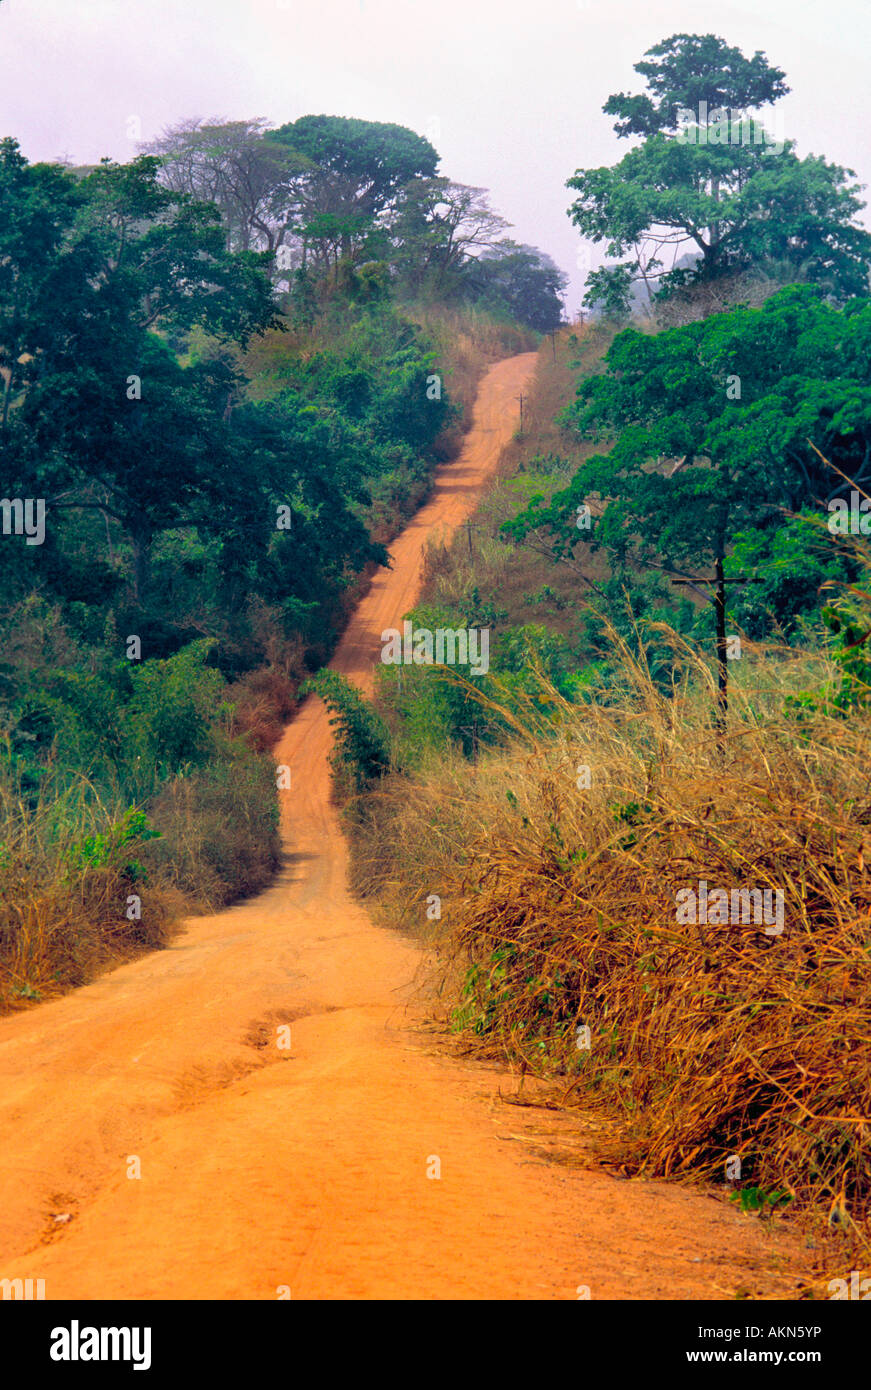 A red dirt dusty road leads into the bush near Man in west central Cote d'Ivoire Stock Photo